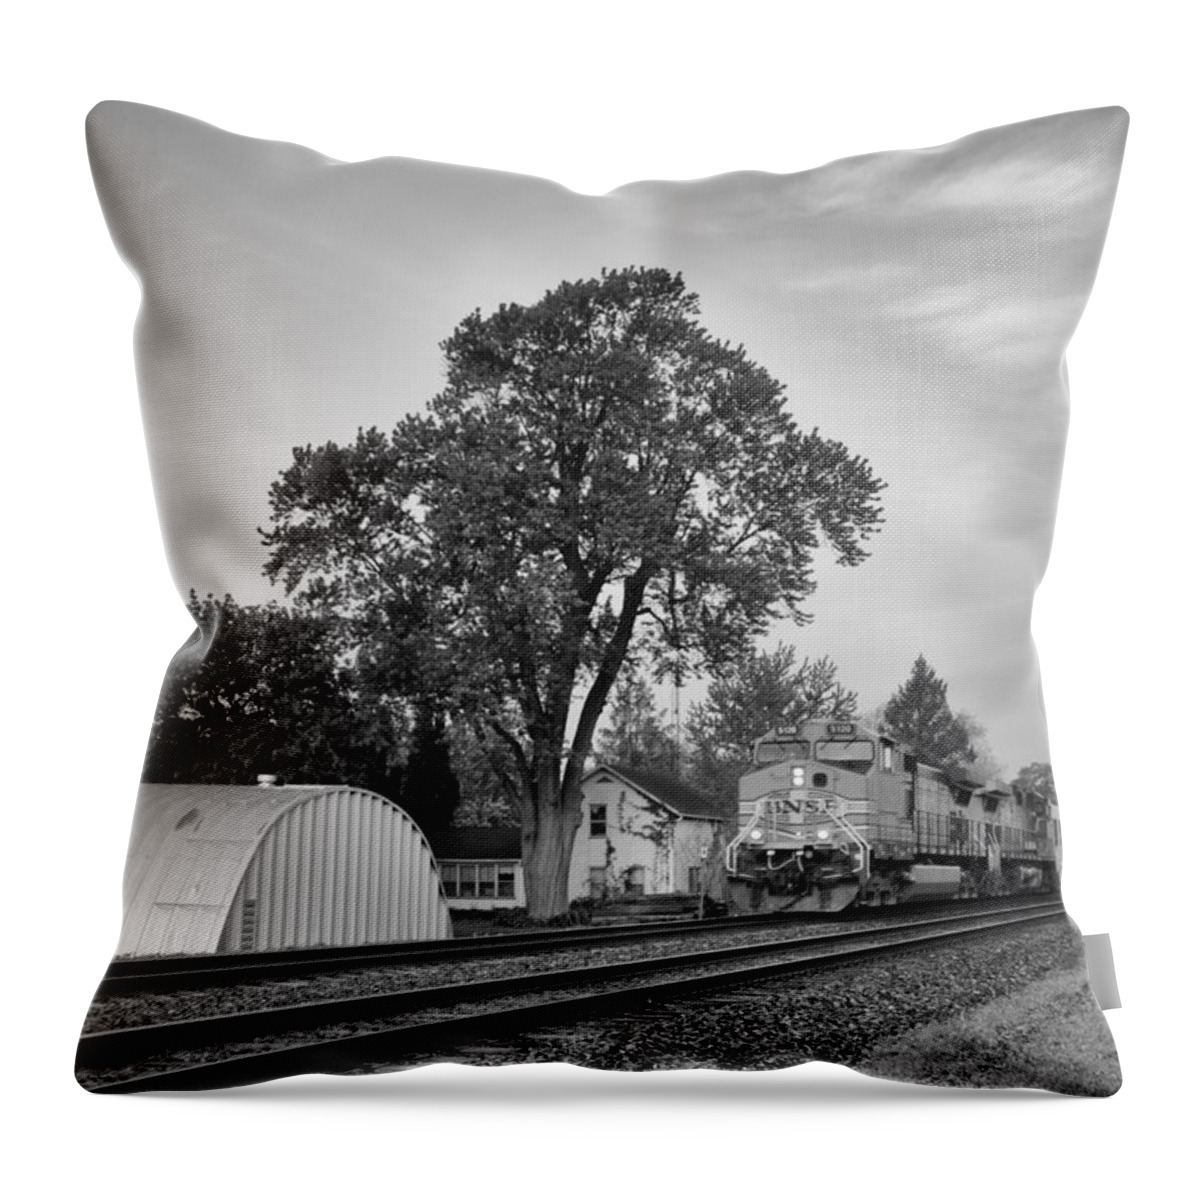 Trains Throw Pillow featuring the photograph Train Of Thought #2 by Tom Druin